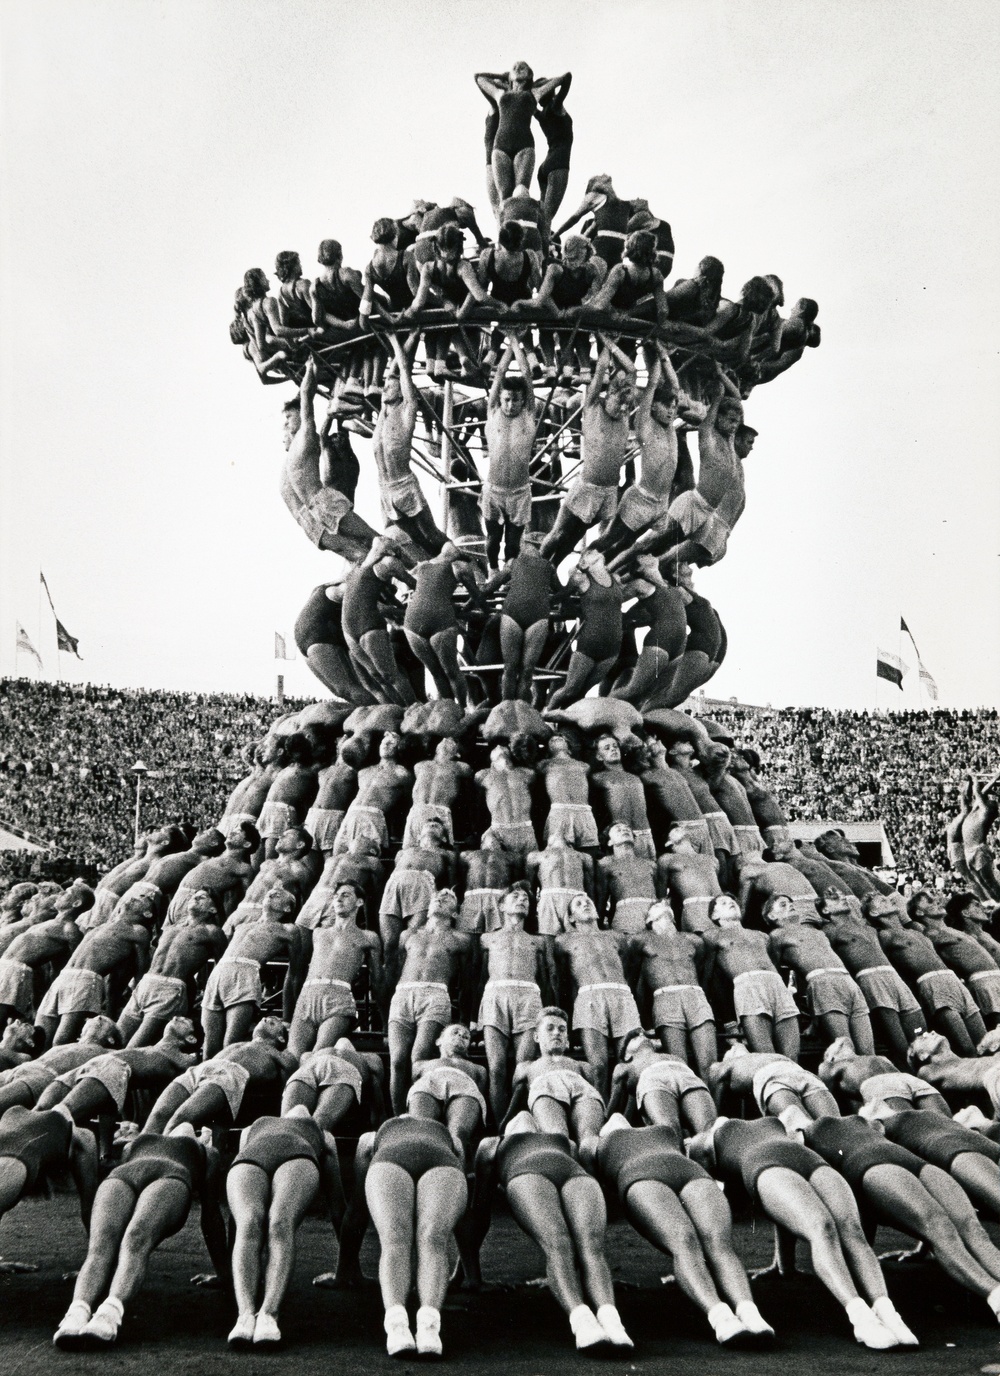 Black and white photograph of athletic men and women holding positions to create a human pyramid several stories high in the center of a packed amphitheater full of people.